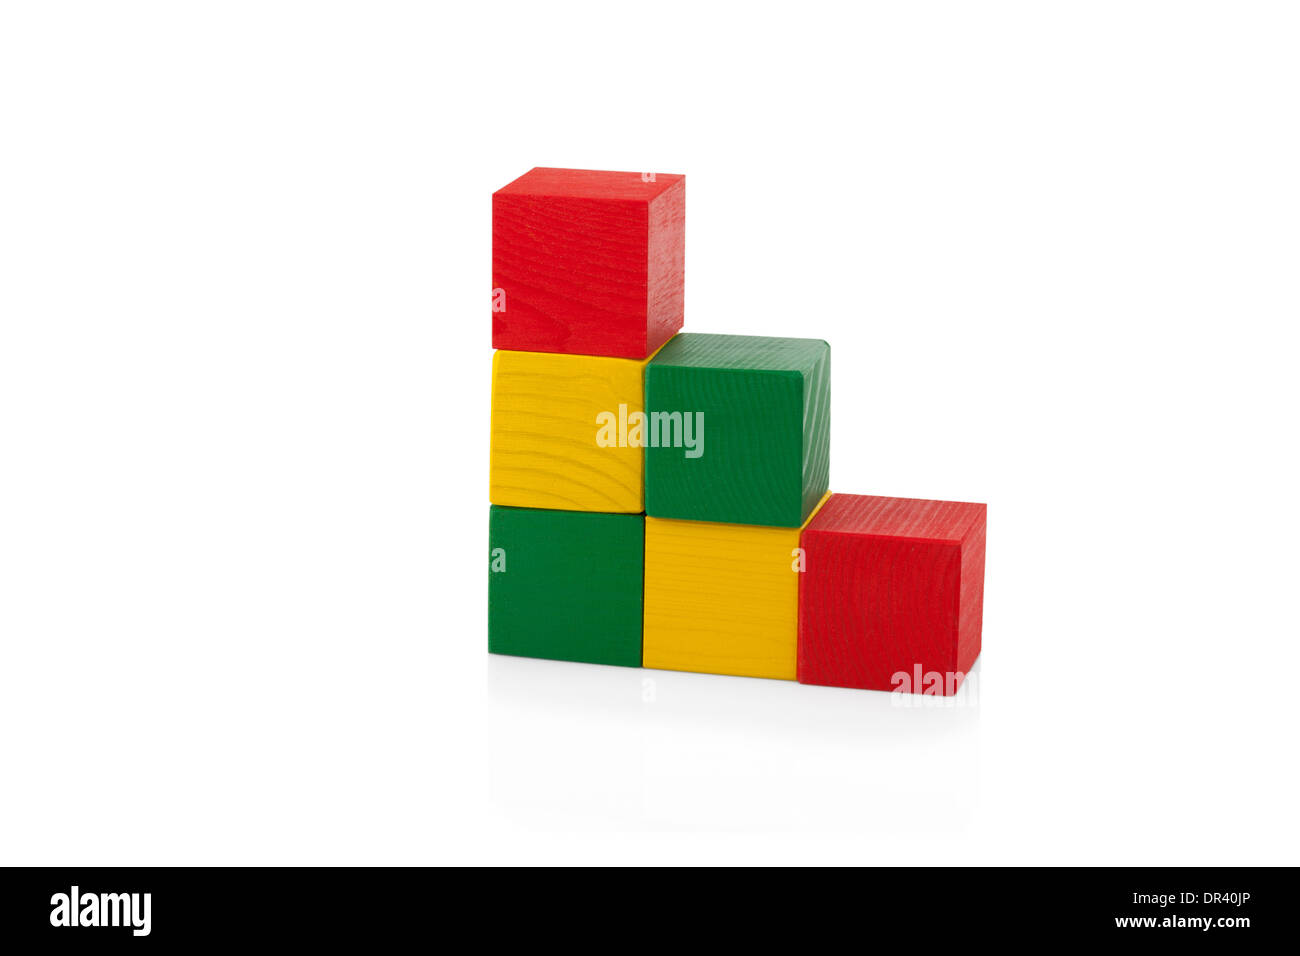 Wooden blocks, pyramid of colorful cubes, childrens toy isolated on white background Stock Photo